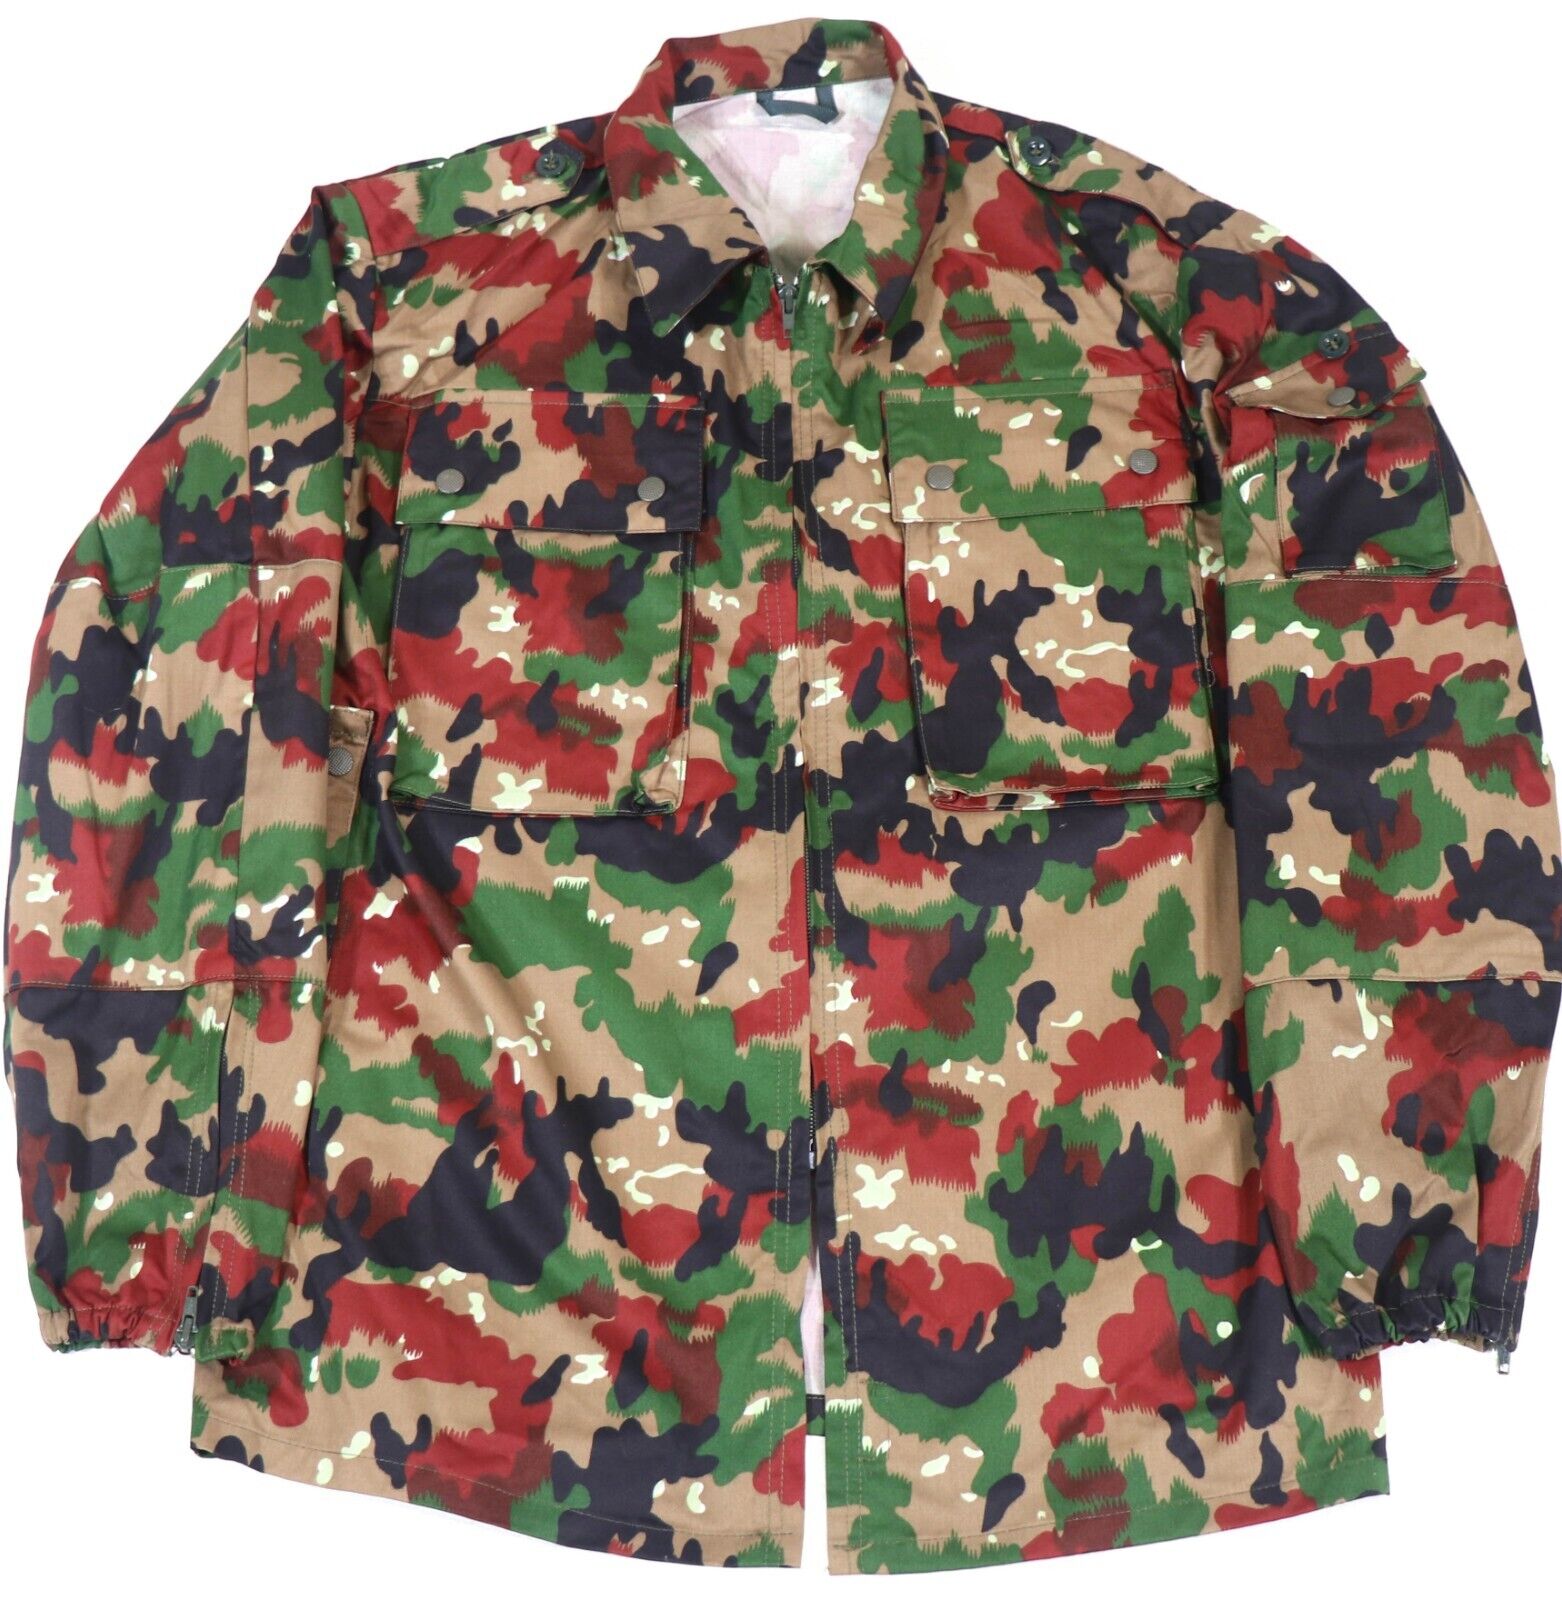 Large Swiss Army M83 Alpenflage Field Jacket Military Camouflage Uniform M70